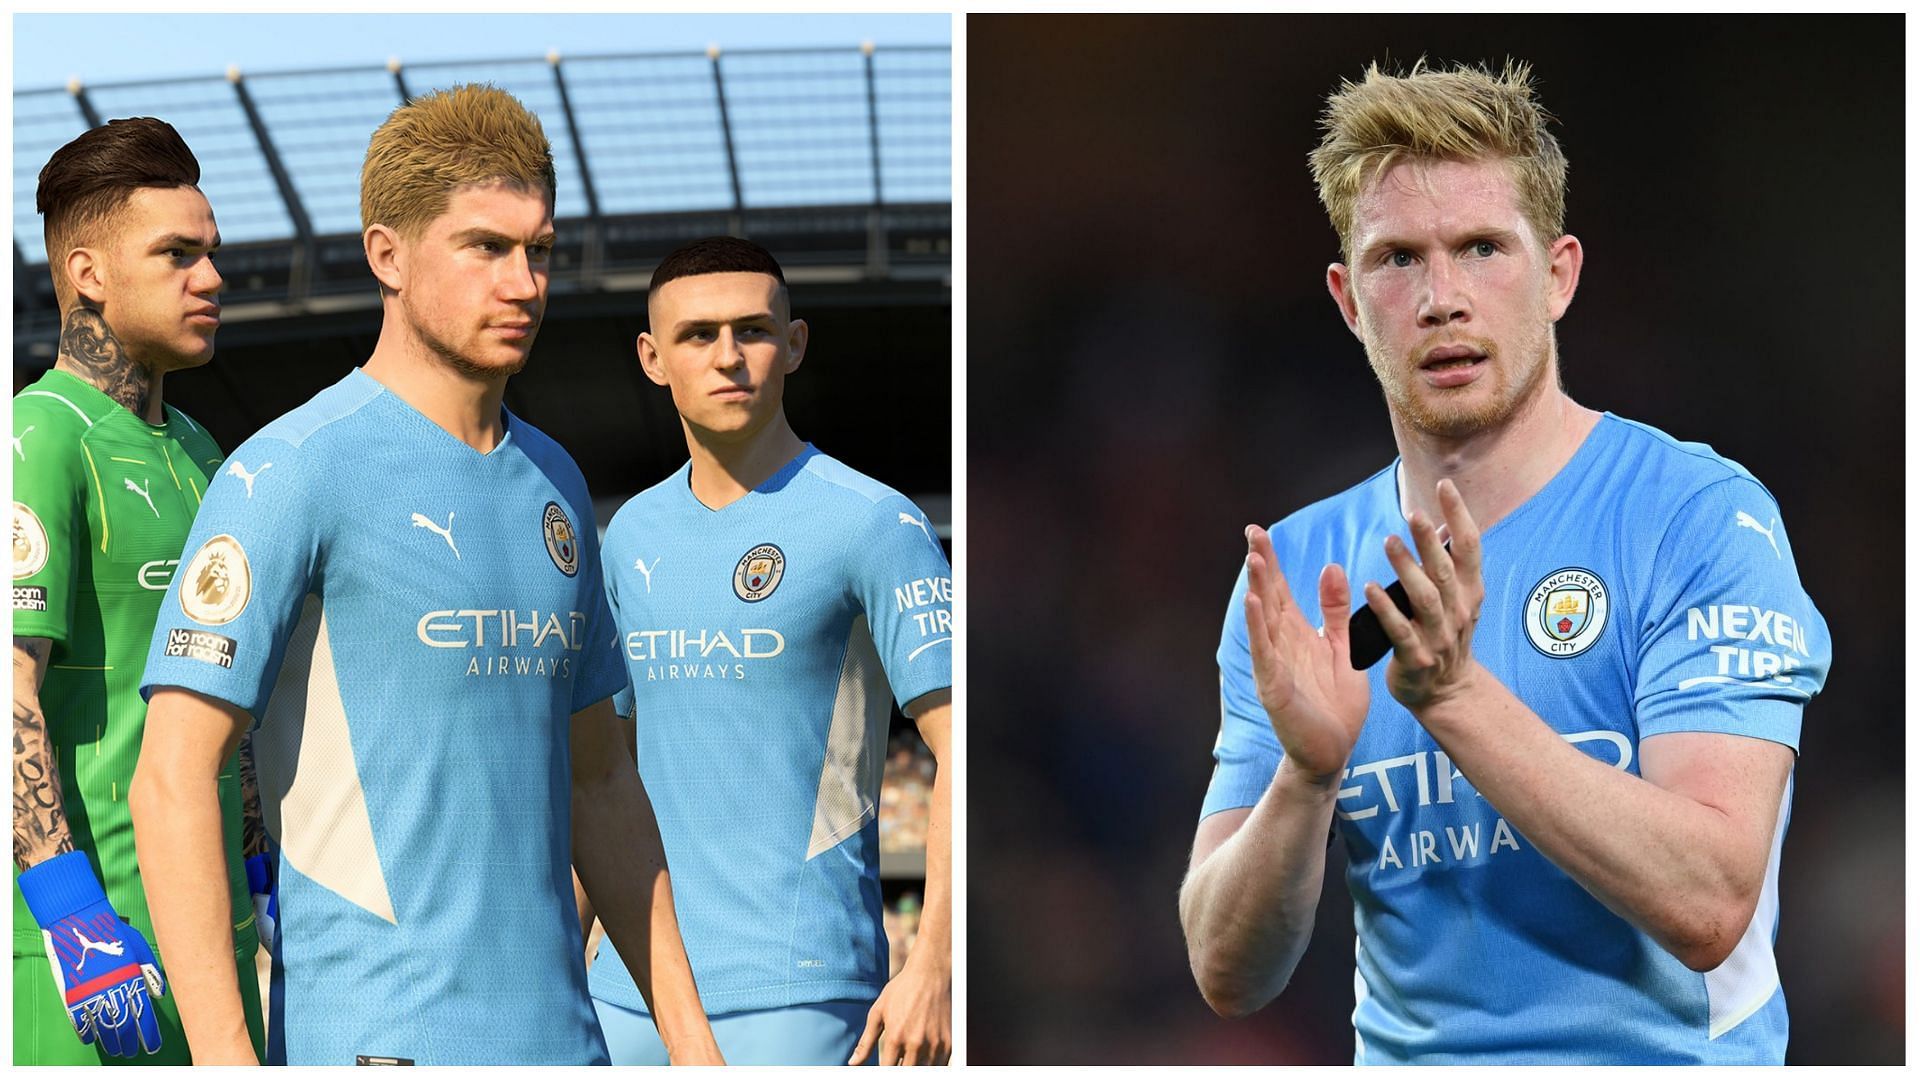 Kevin De Bruyne is one of the highest rated players in FIFA 23 with an overall rating of 91 (Images via EA Sports and Getty Images)